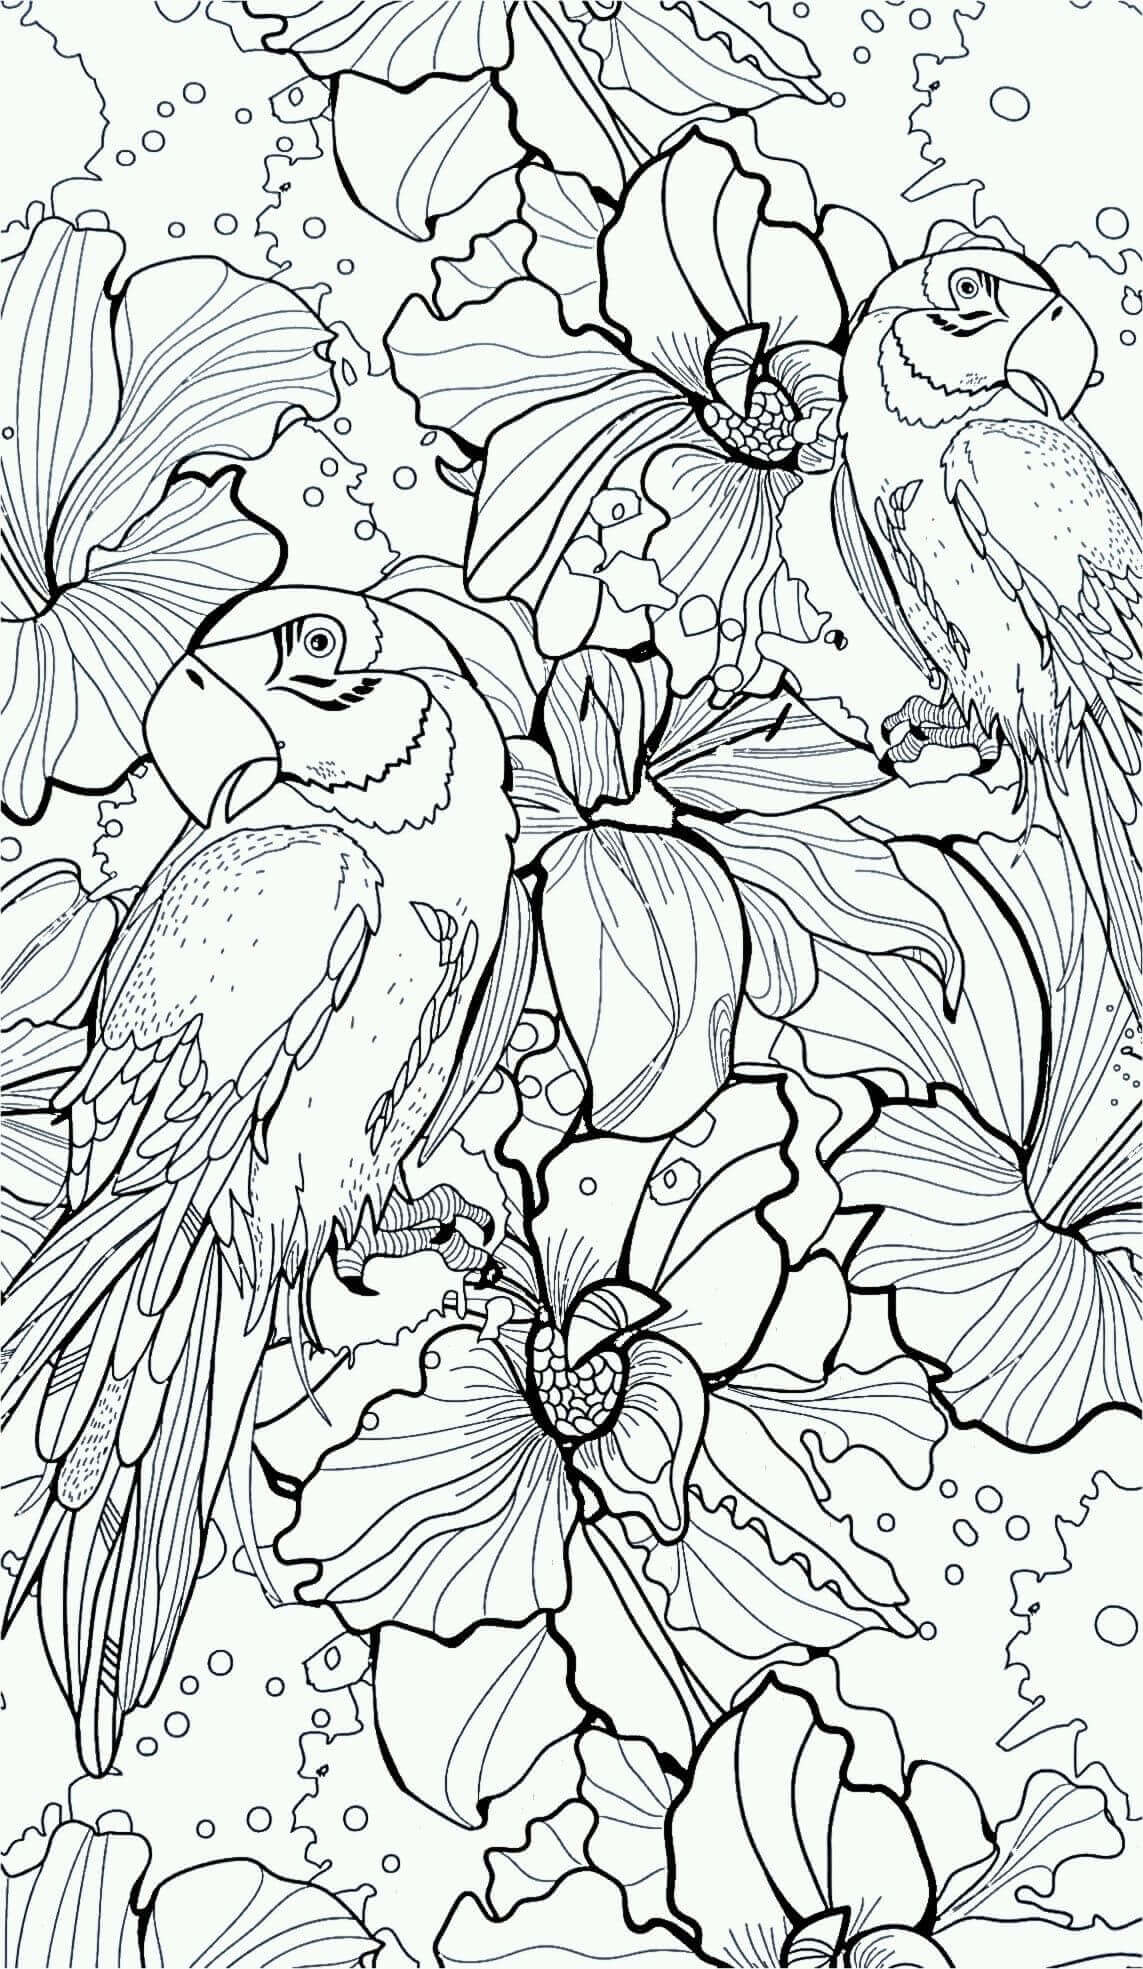 Parrot Coloring Page for Adults